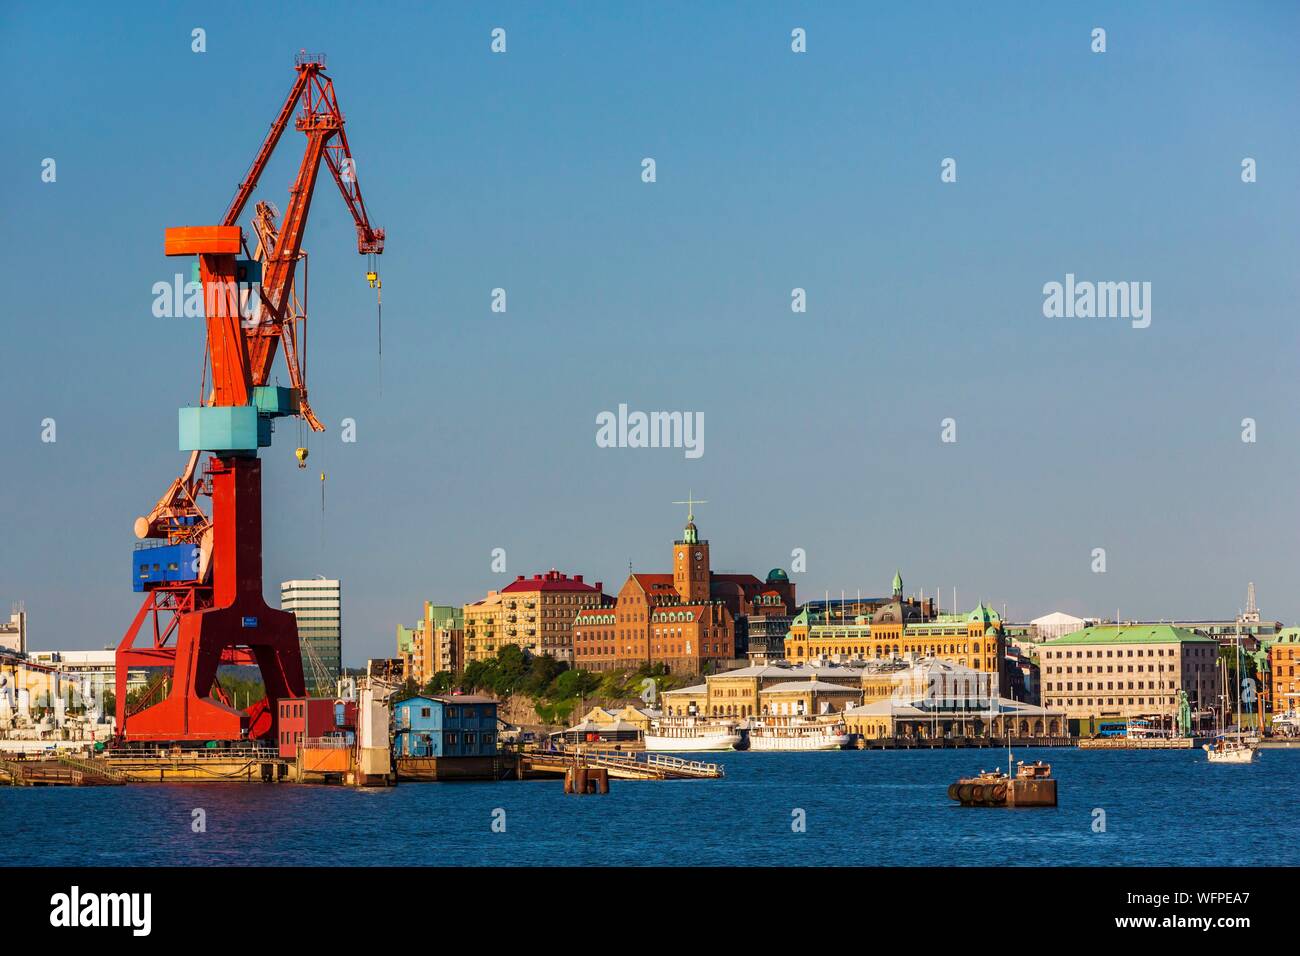 Sweden, Vastra Gotaland, Goteborg (Gothenburg), the former shipyards of Lundbyvassen, buildings of the company ASECO on Packhusplatsen facing the harbor and Kvarnberget and his clock Stock Photo